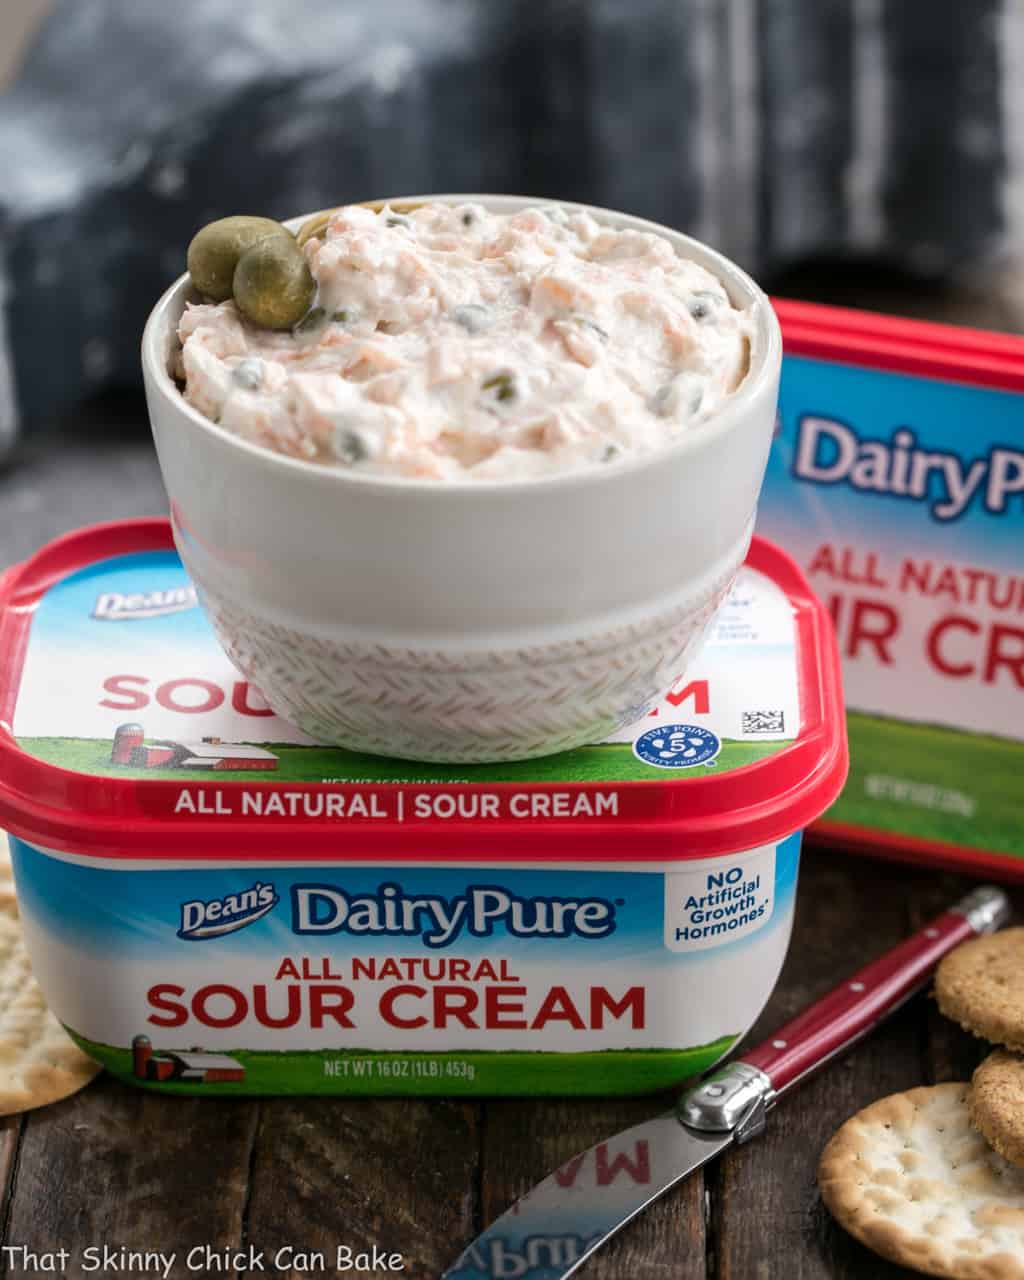 A bowl of Smoked Salmon Dip with Capers sitting on top of a container of DairyPure brand sour cream.